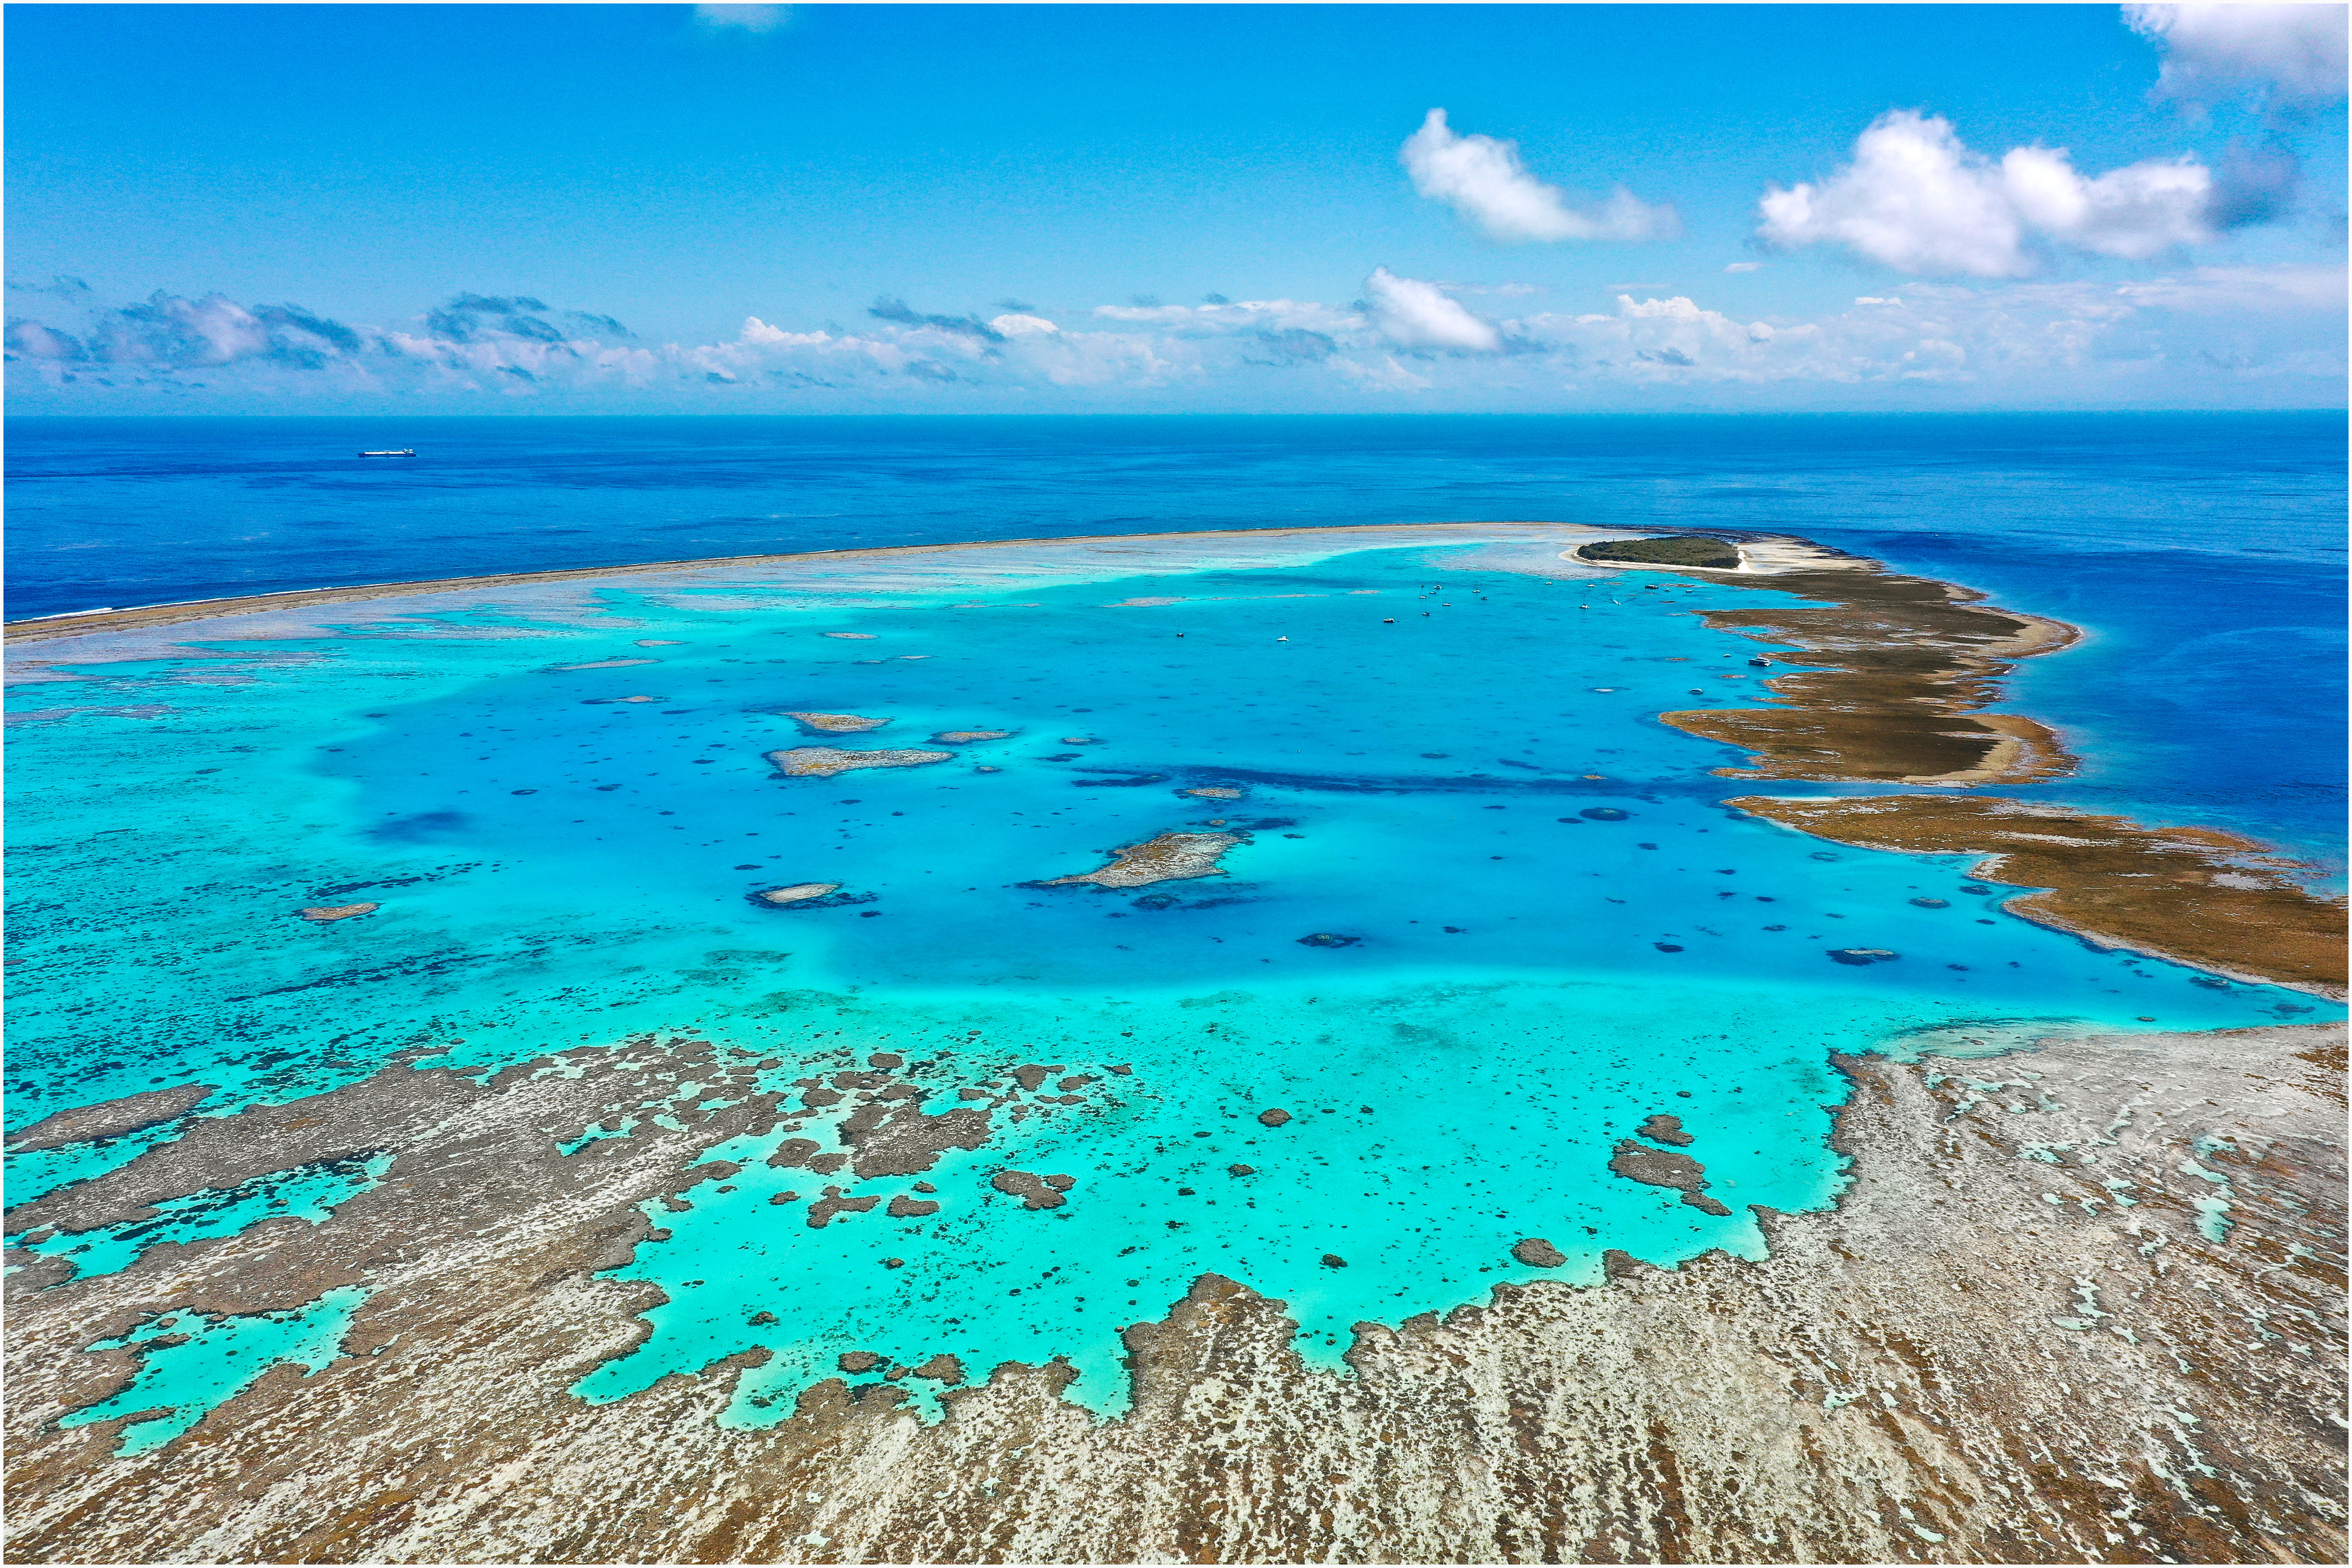 Why The Undiscovered Southern Great Barrier Reef Should Be On Your Travel Hit-List